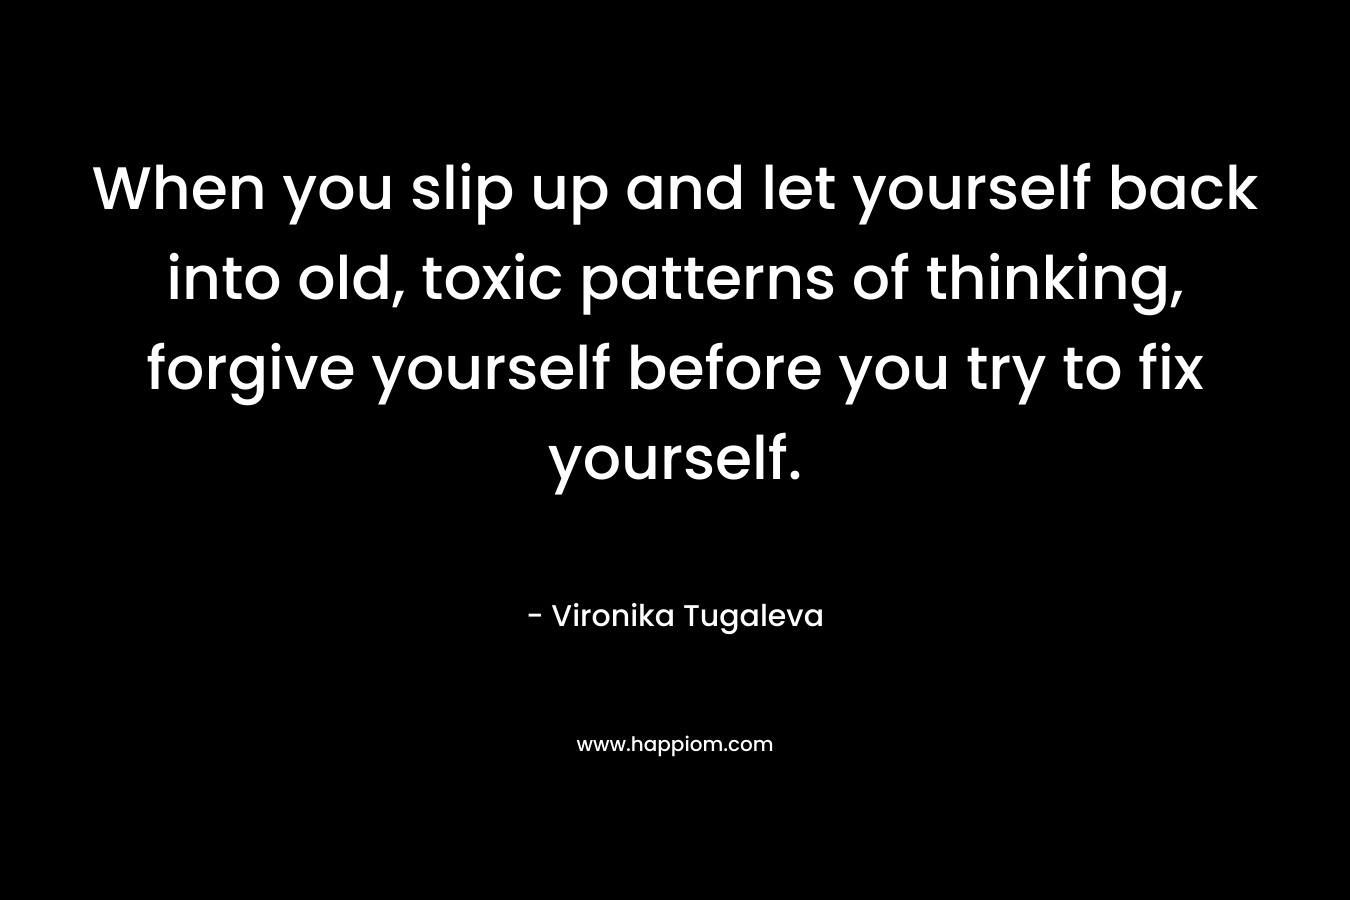 When you slip up and let yourself back into old, toxic patterns of thinking, forgive yourself before you try to fix yourself.